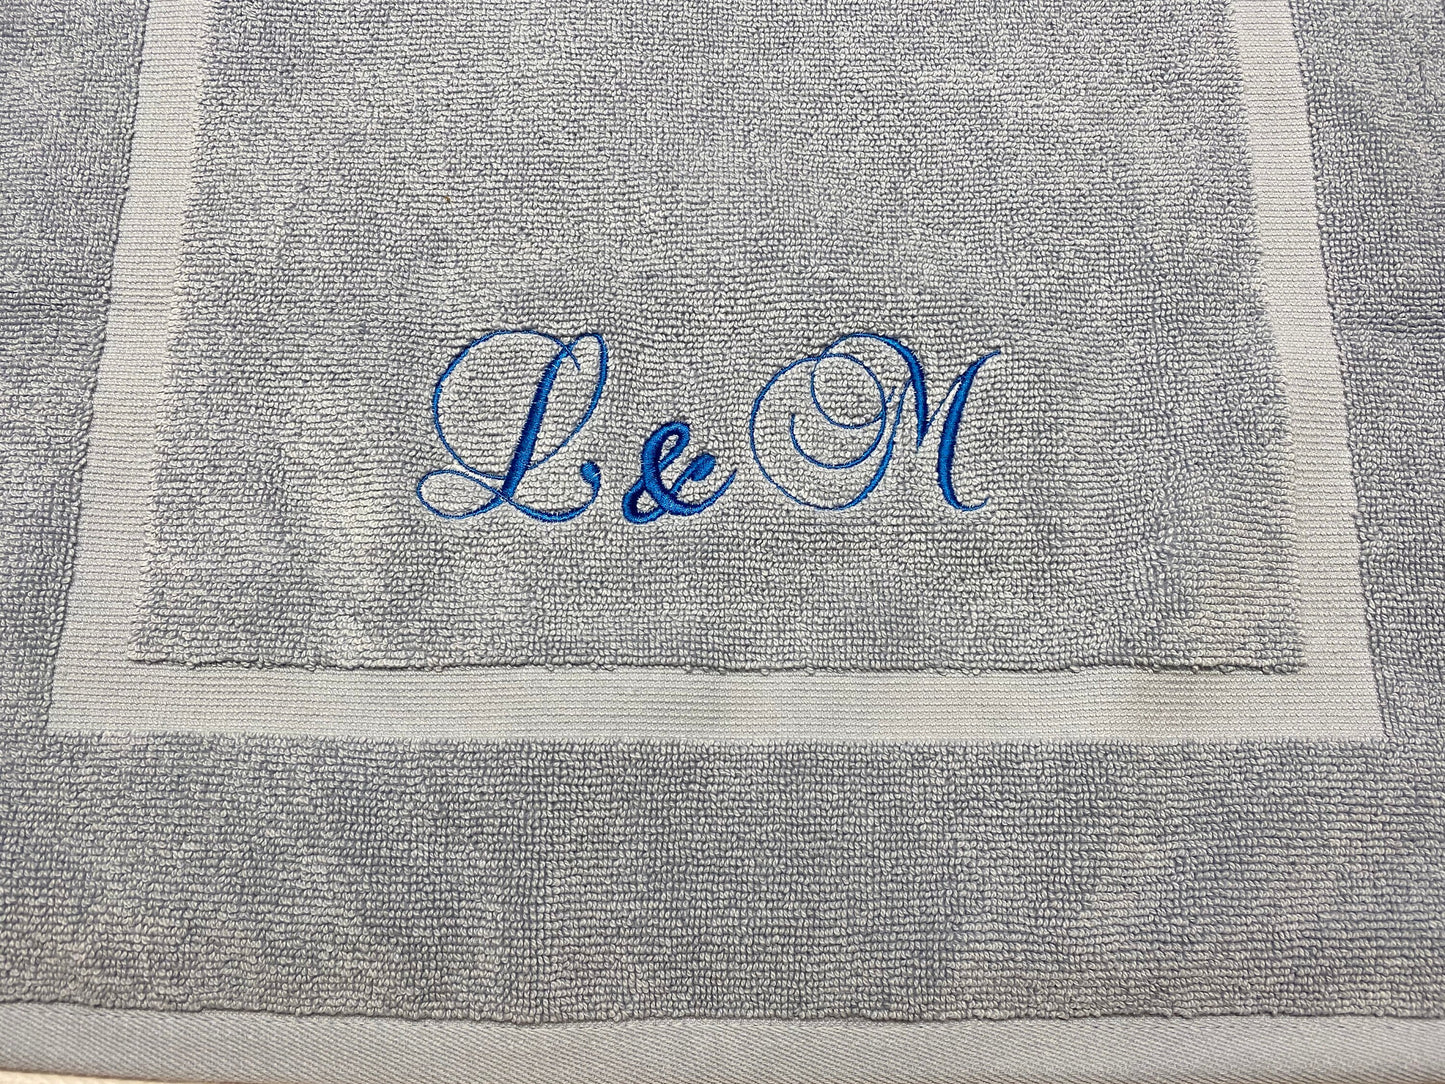 Personalized Bath Mat, Ultra Soft and Absorbent, Birthday, Wedding, Anniversary, Graduation Gifts, Machine Washable, 20"x34", 625 GSM